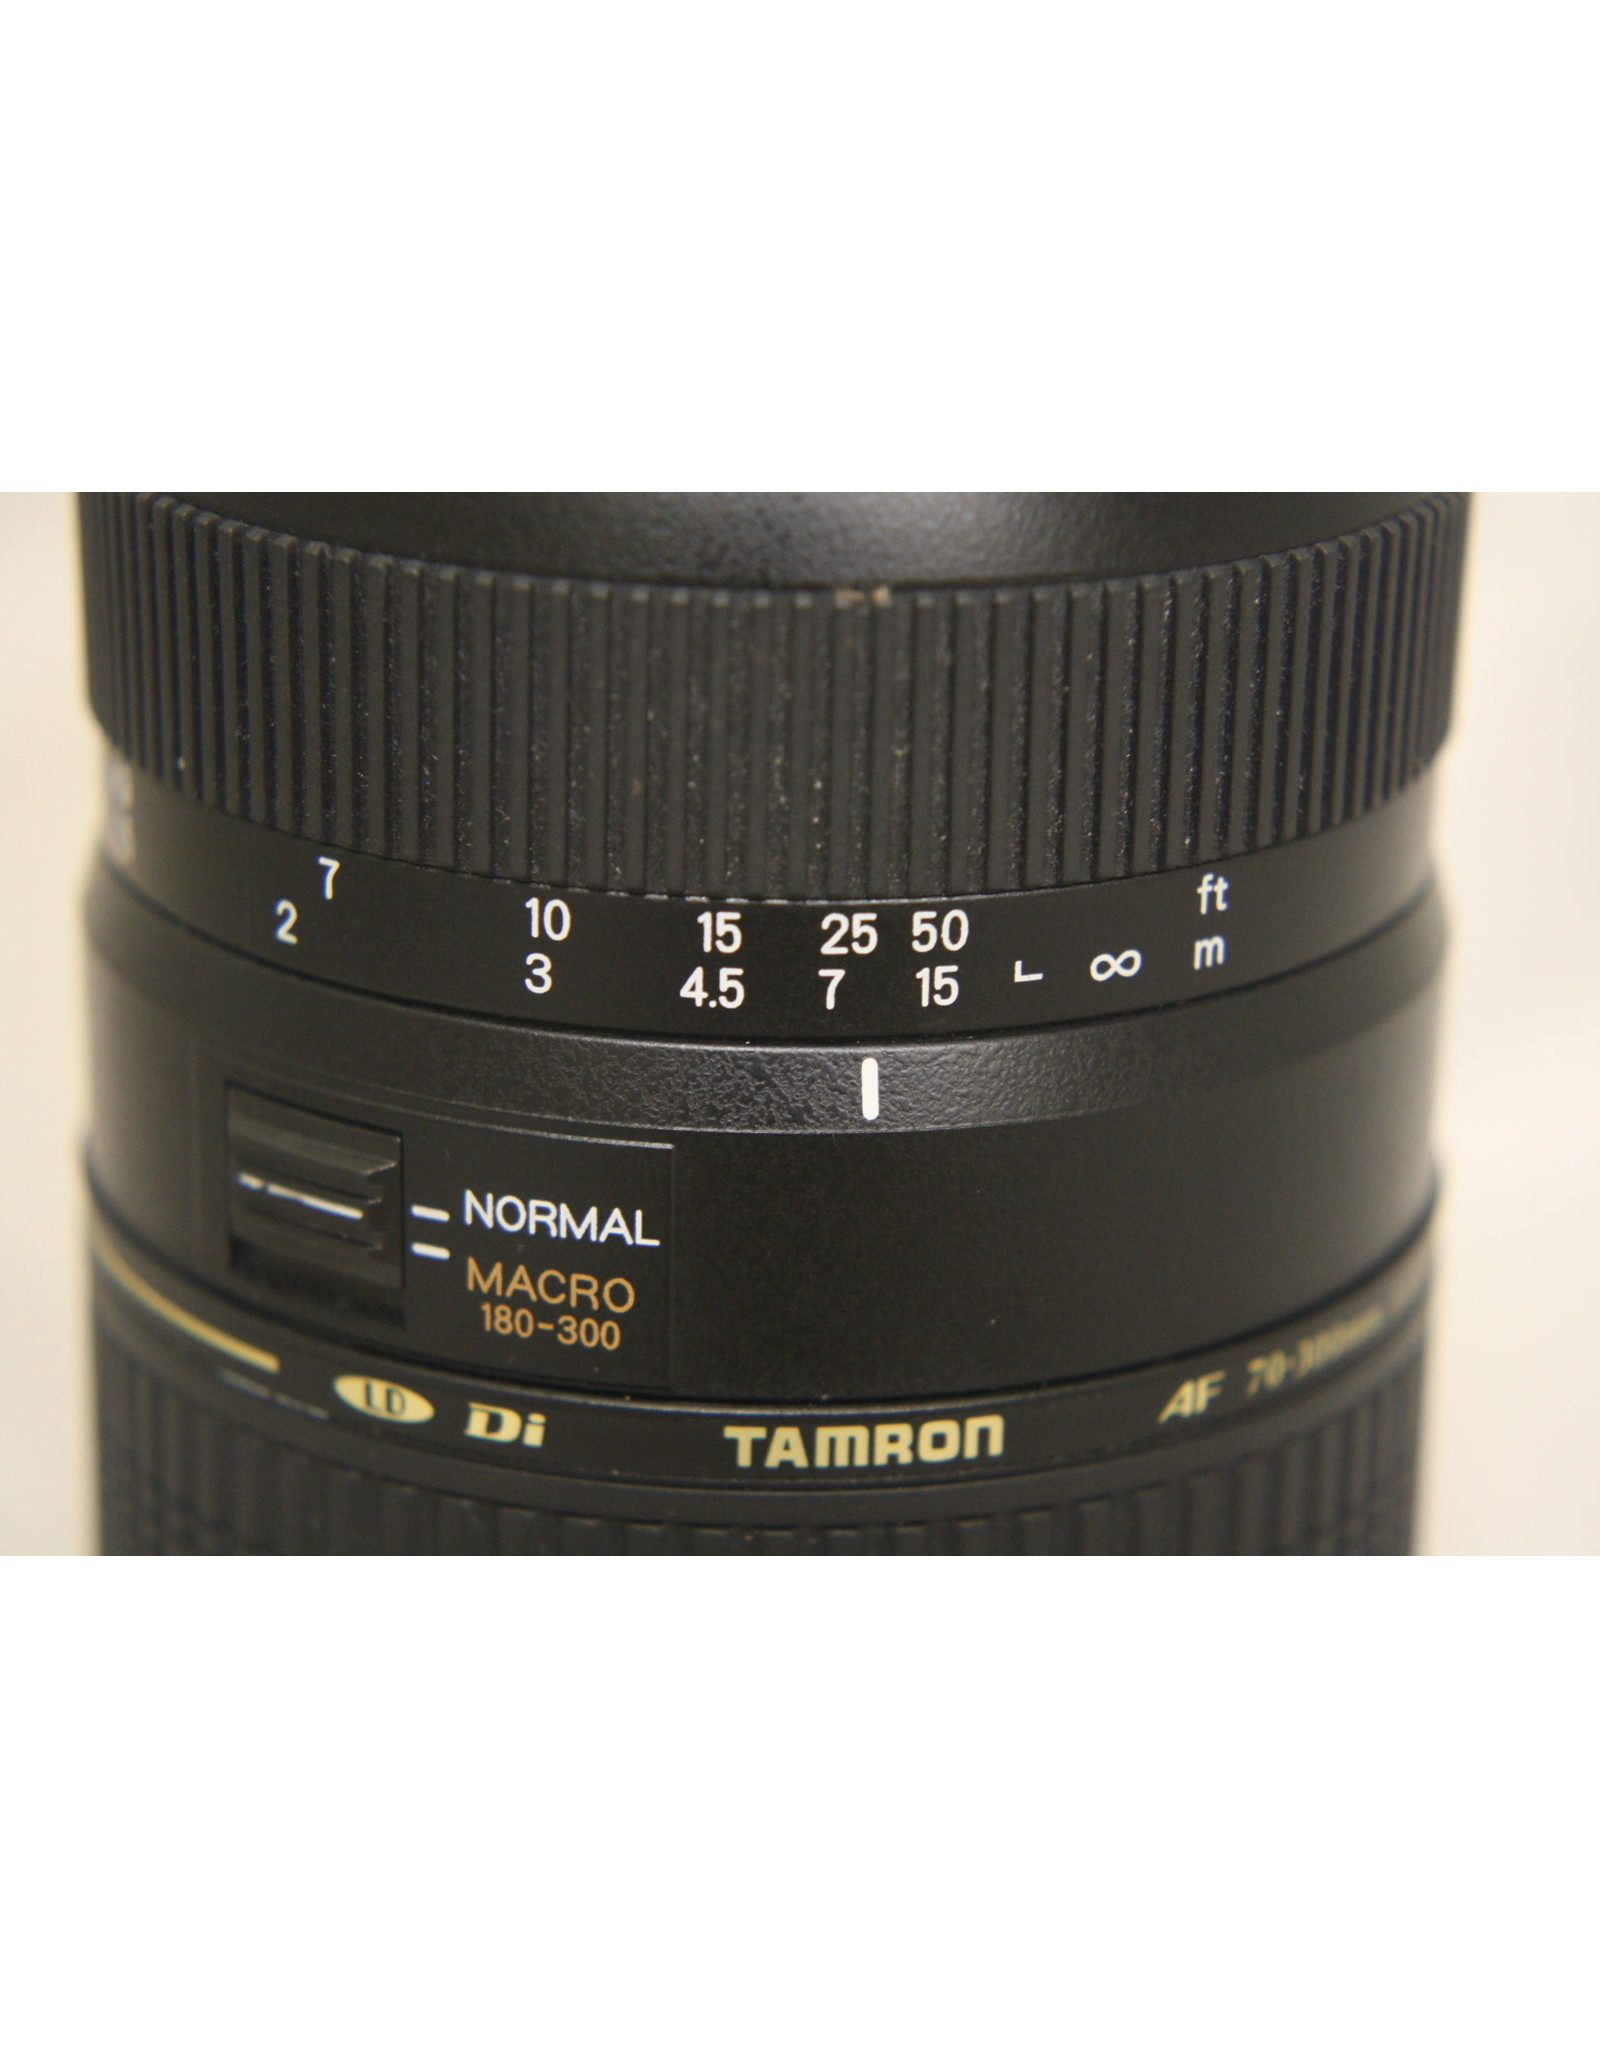 Tamron Tamron AF 70-300mm 4-5.6 Lens for Sony/MAxxum (Pre-owned)